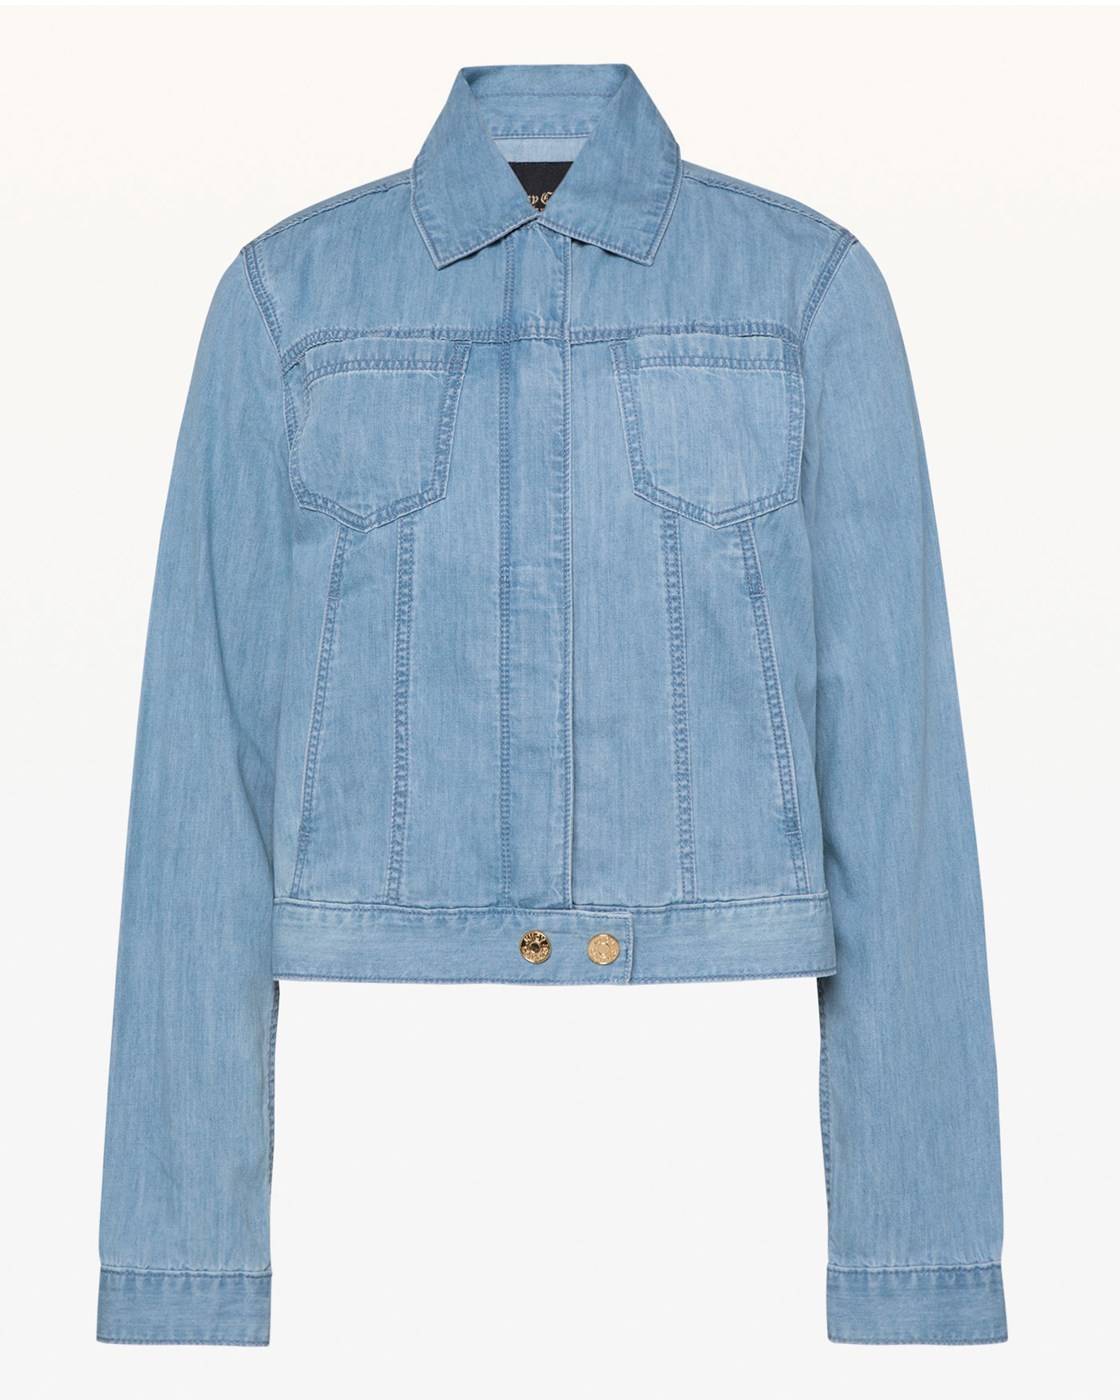 Juicy Couture Cotton Chambray Jacket